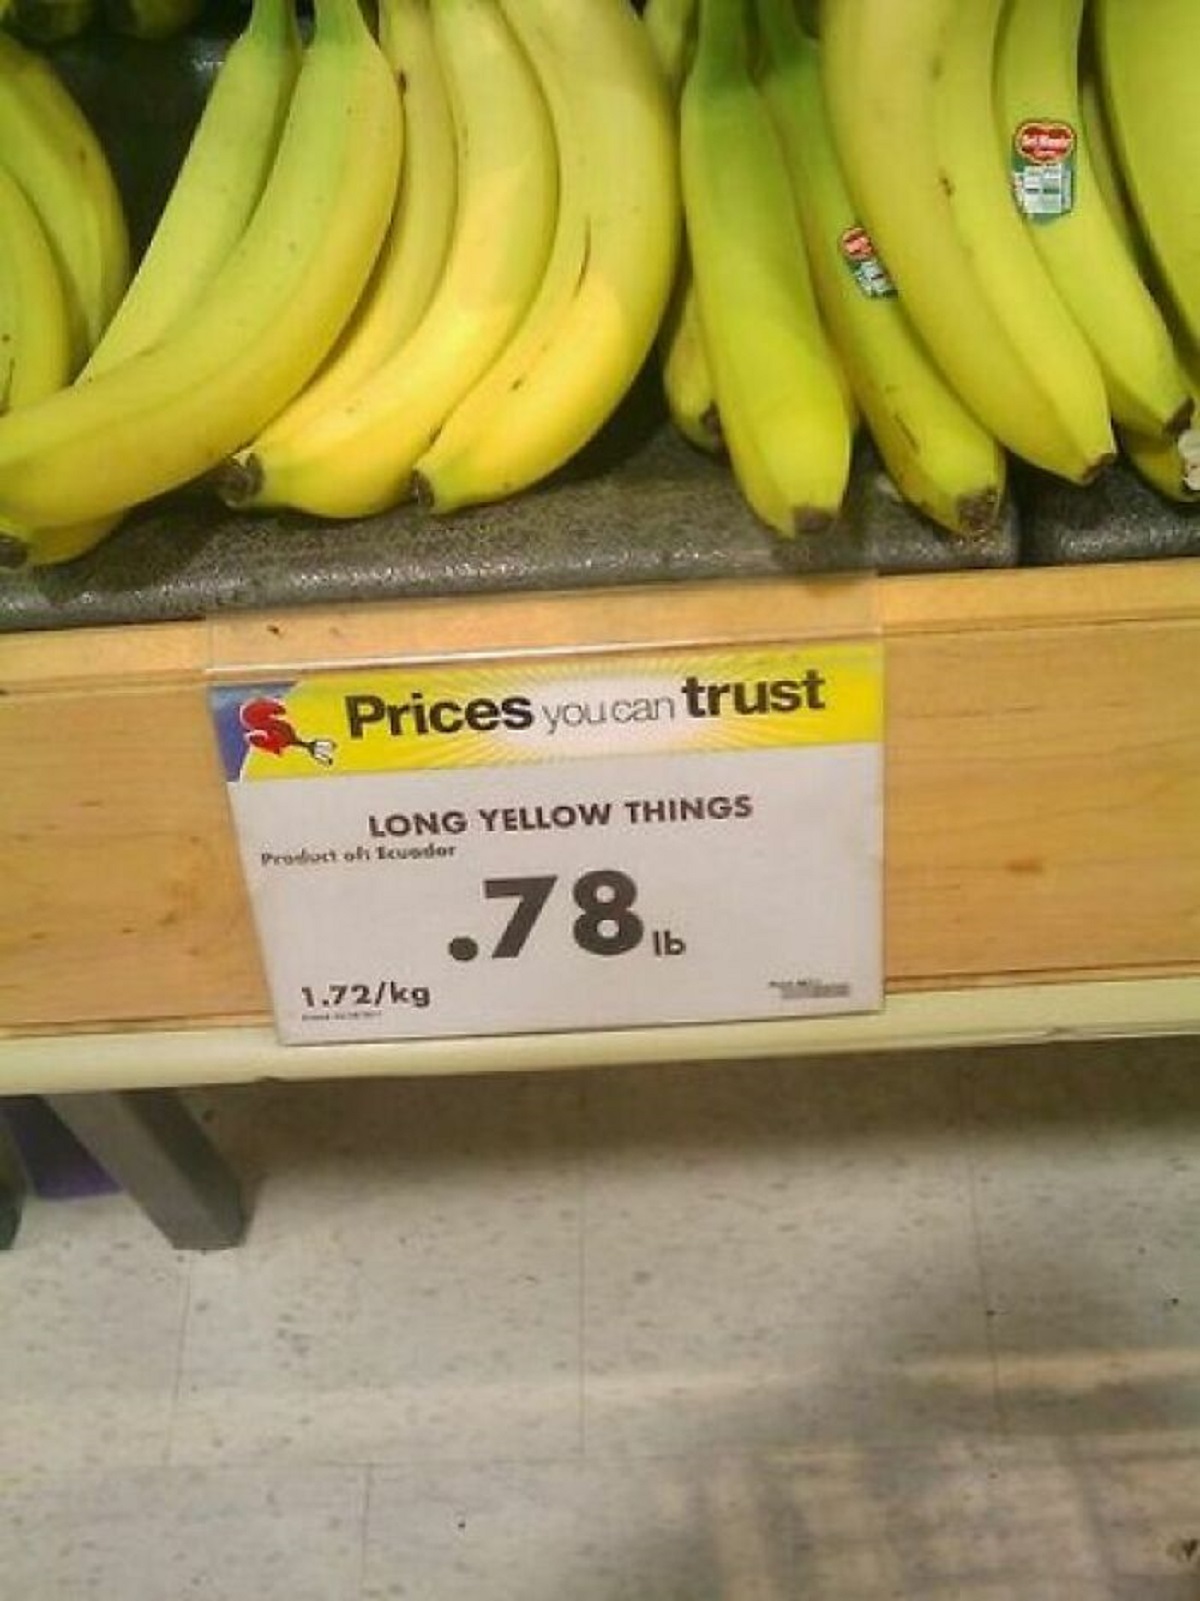 long yellow things meme - Prices you can trust Long Yellow Things Product of Ecuador 1.72kg .78ib 0